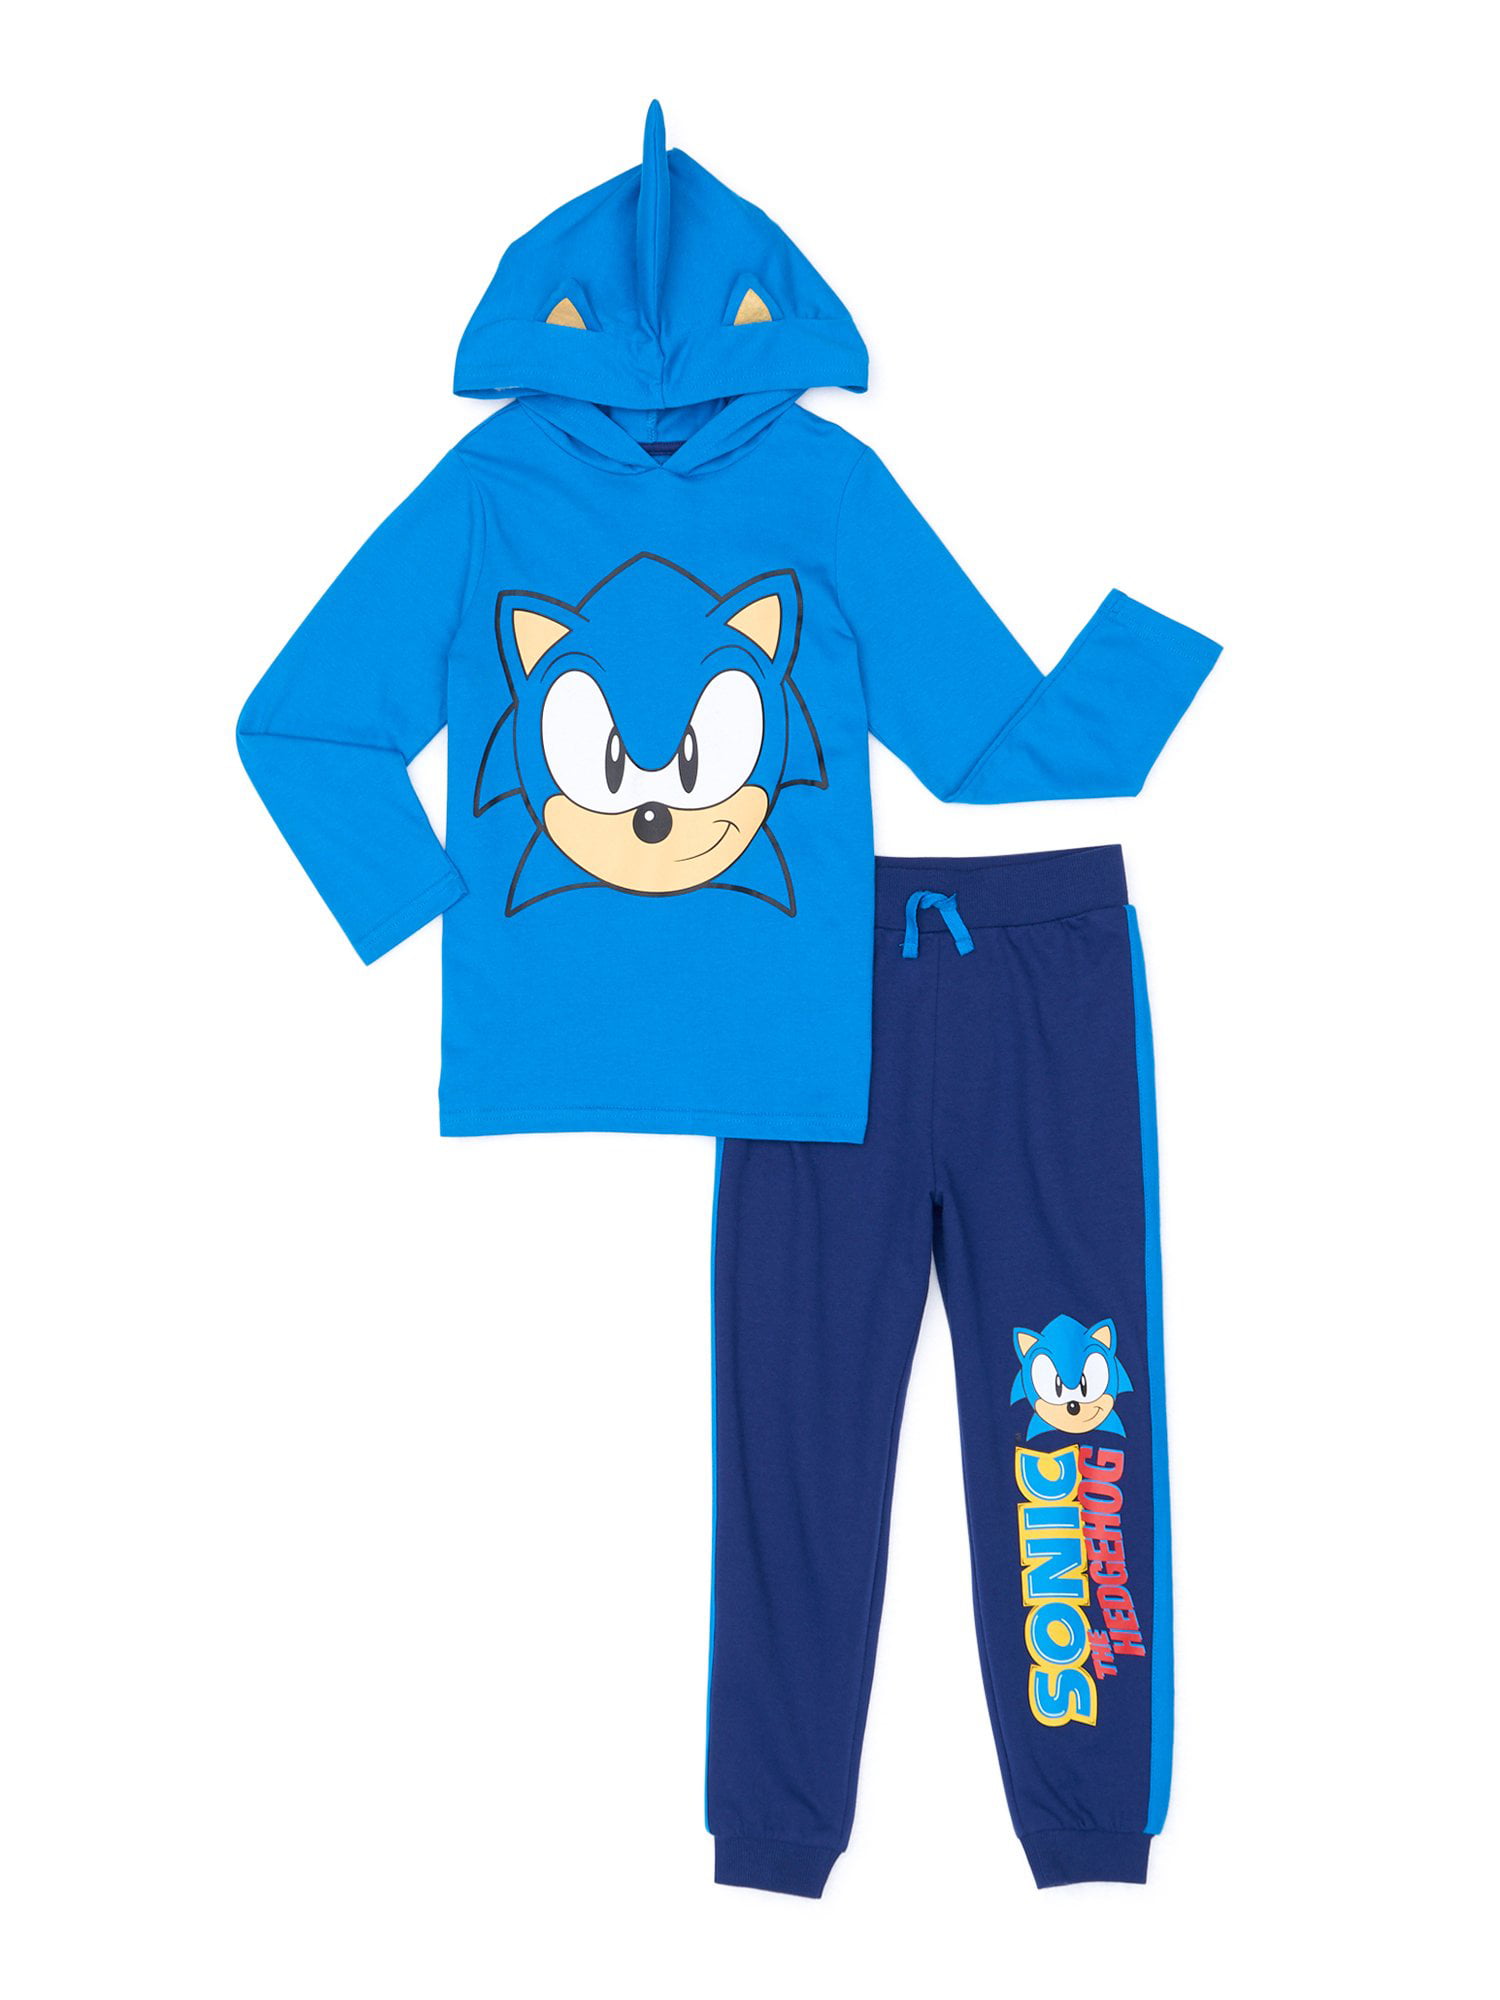 Boys Sonic The Hedgehog Hoodies Tracksuit Top Size 2 3 4 5 6 7 8 Years Casual 